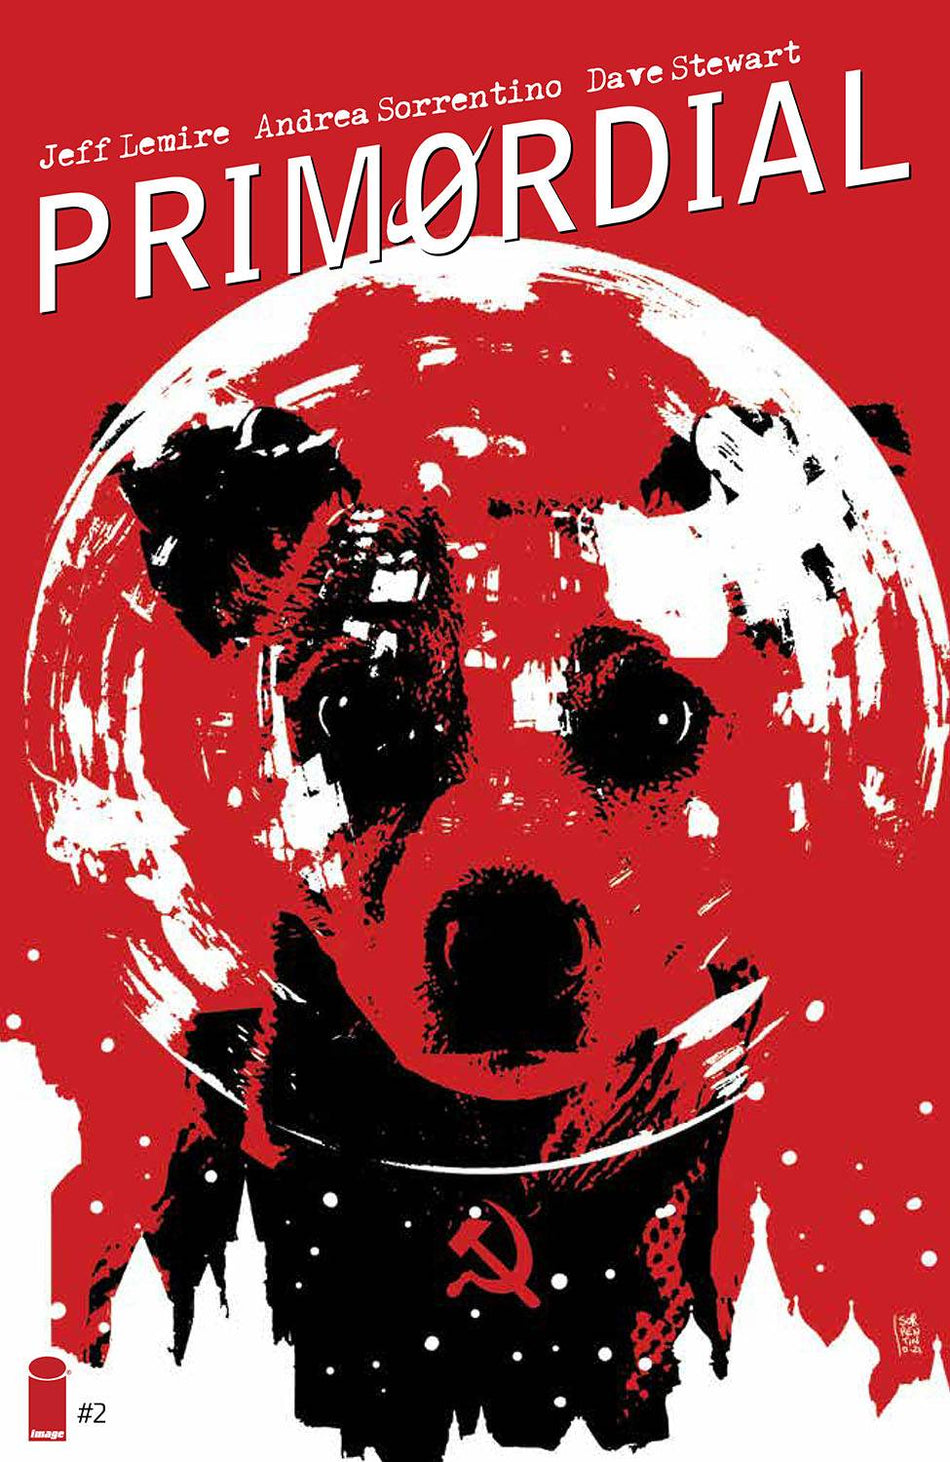 Photo of Primordial Issue 2 (of 6) CVR A Sorrentino (MR) comic sold by Stronghold Collectibles